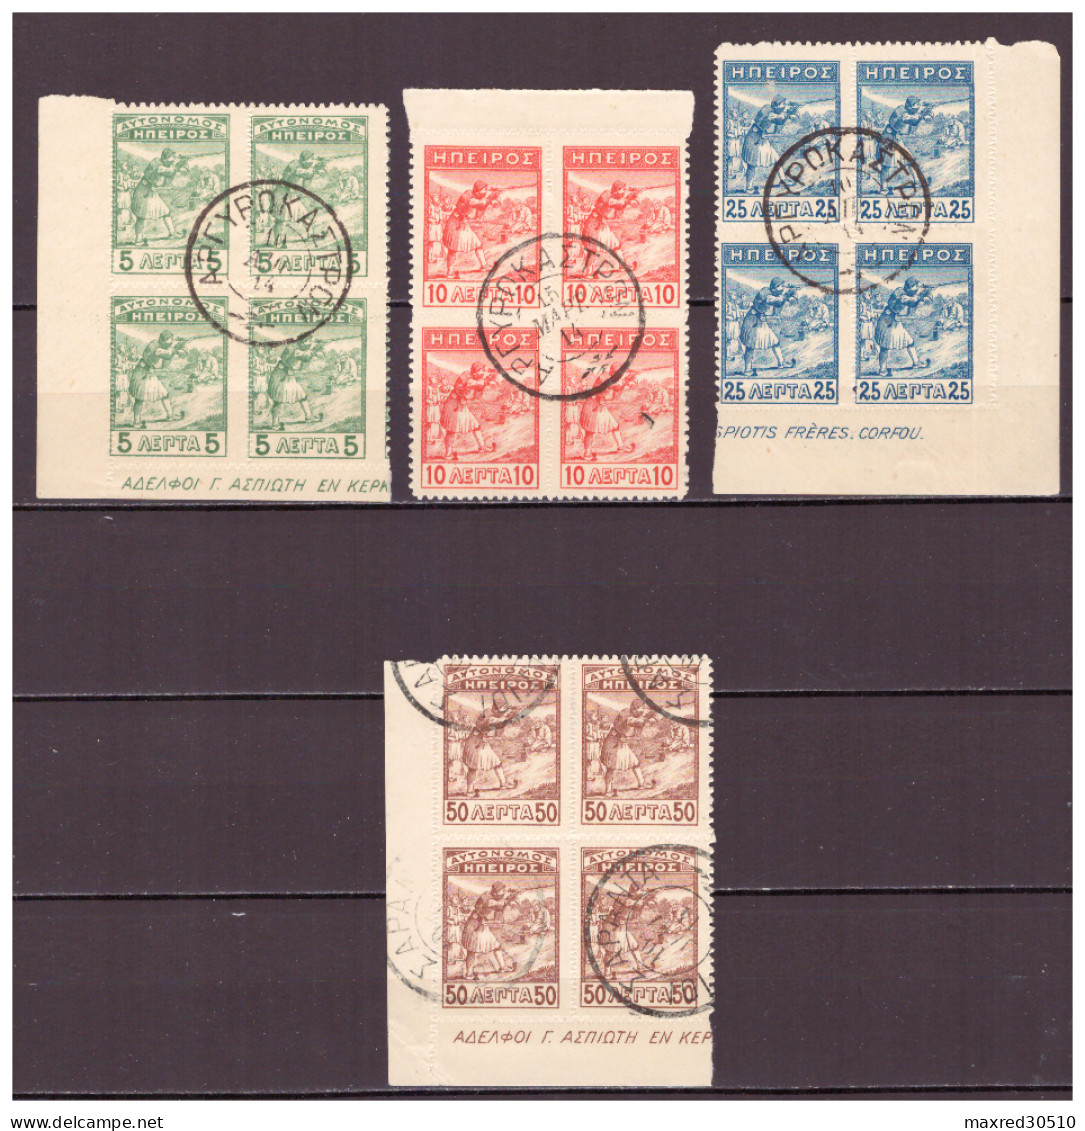 GREECE AUTONOMOUS EPIRUS 1914 4 VALUES FROM THE SET "MARKSMEN" IN BLOCKS OF 4 CANCELLED TO ORDER WITH, SEE DESCRIPTION. - Nordepirus